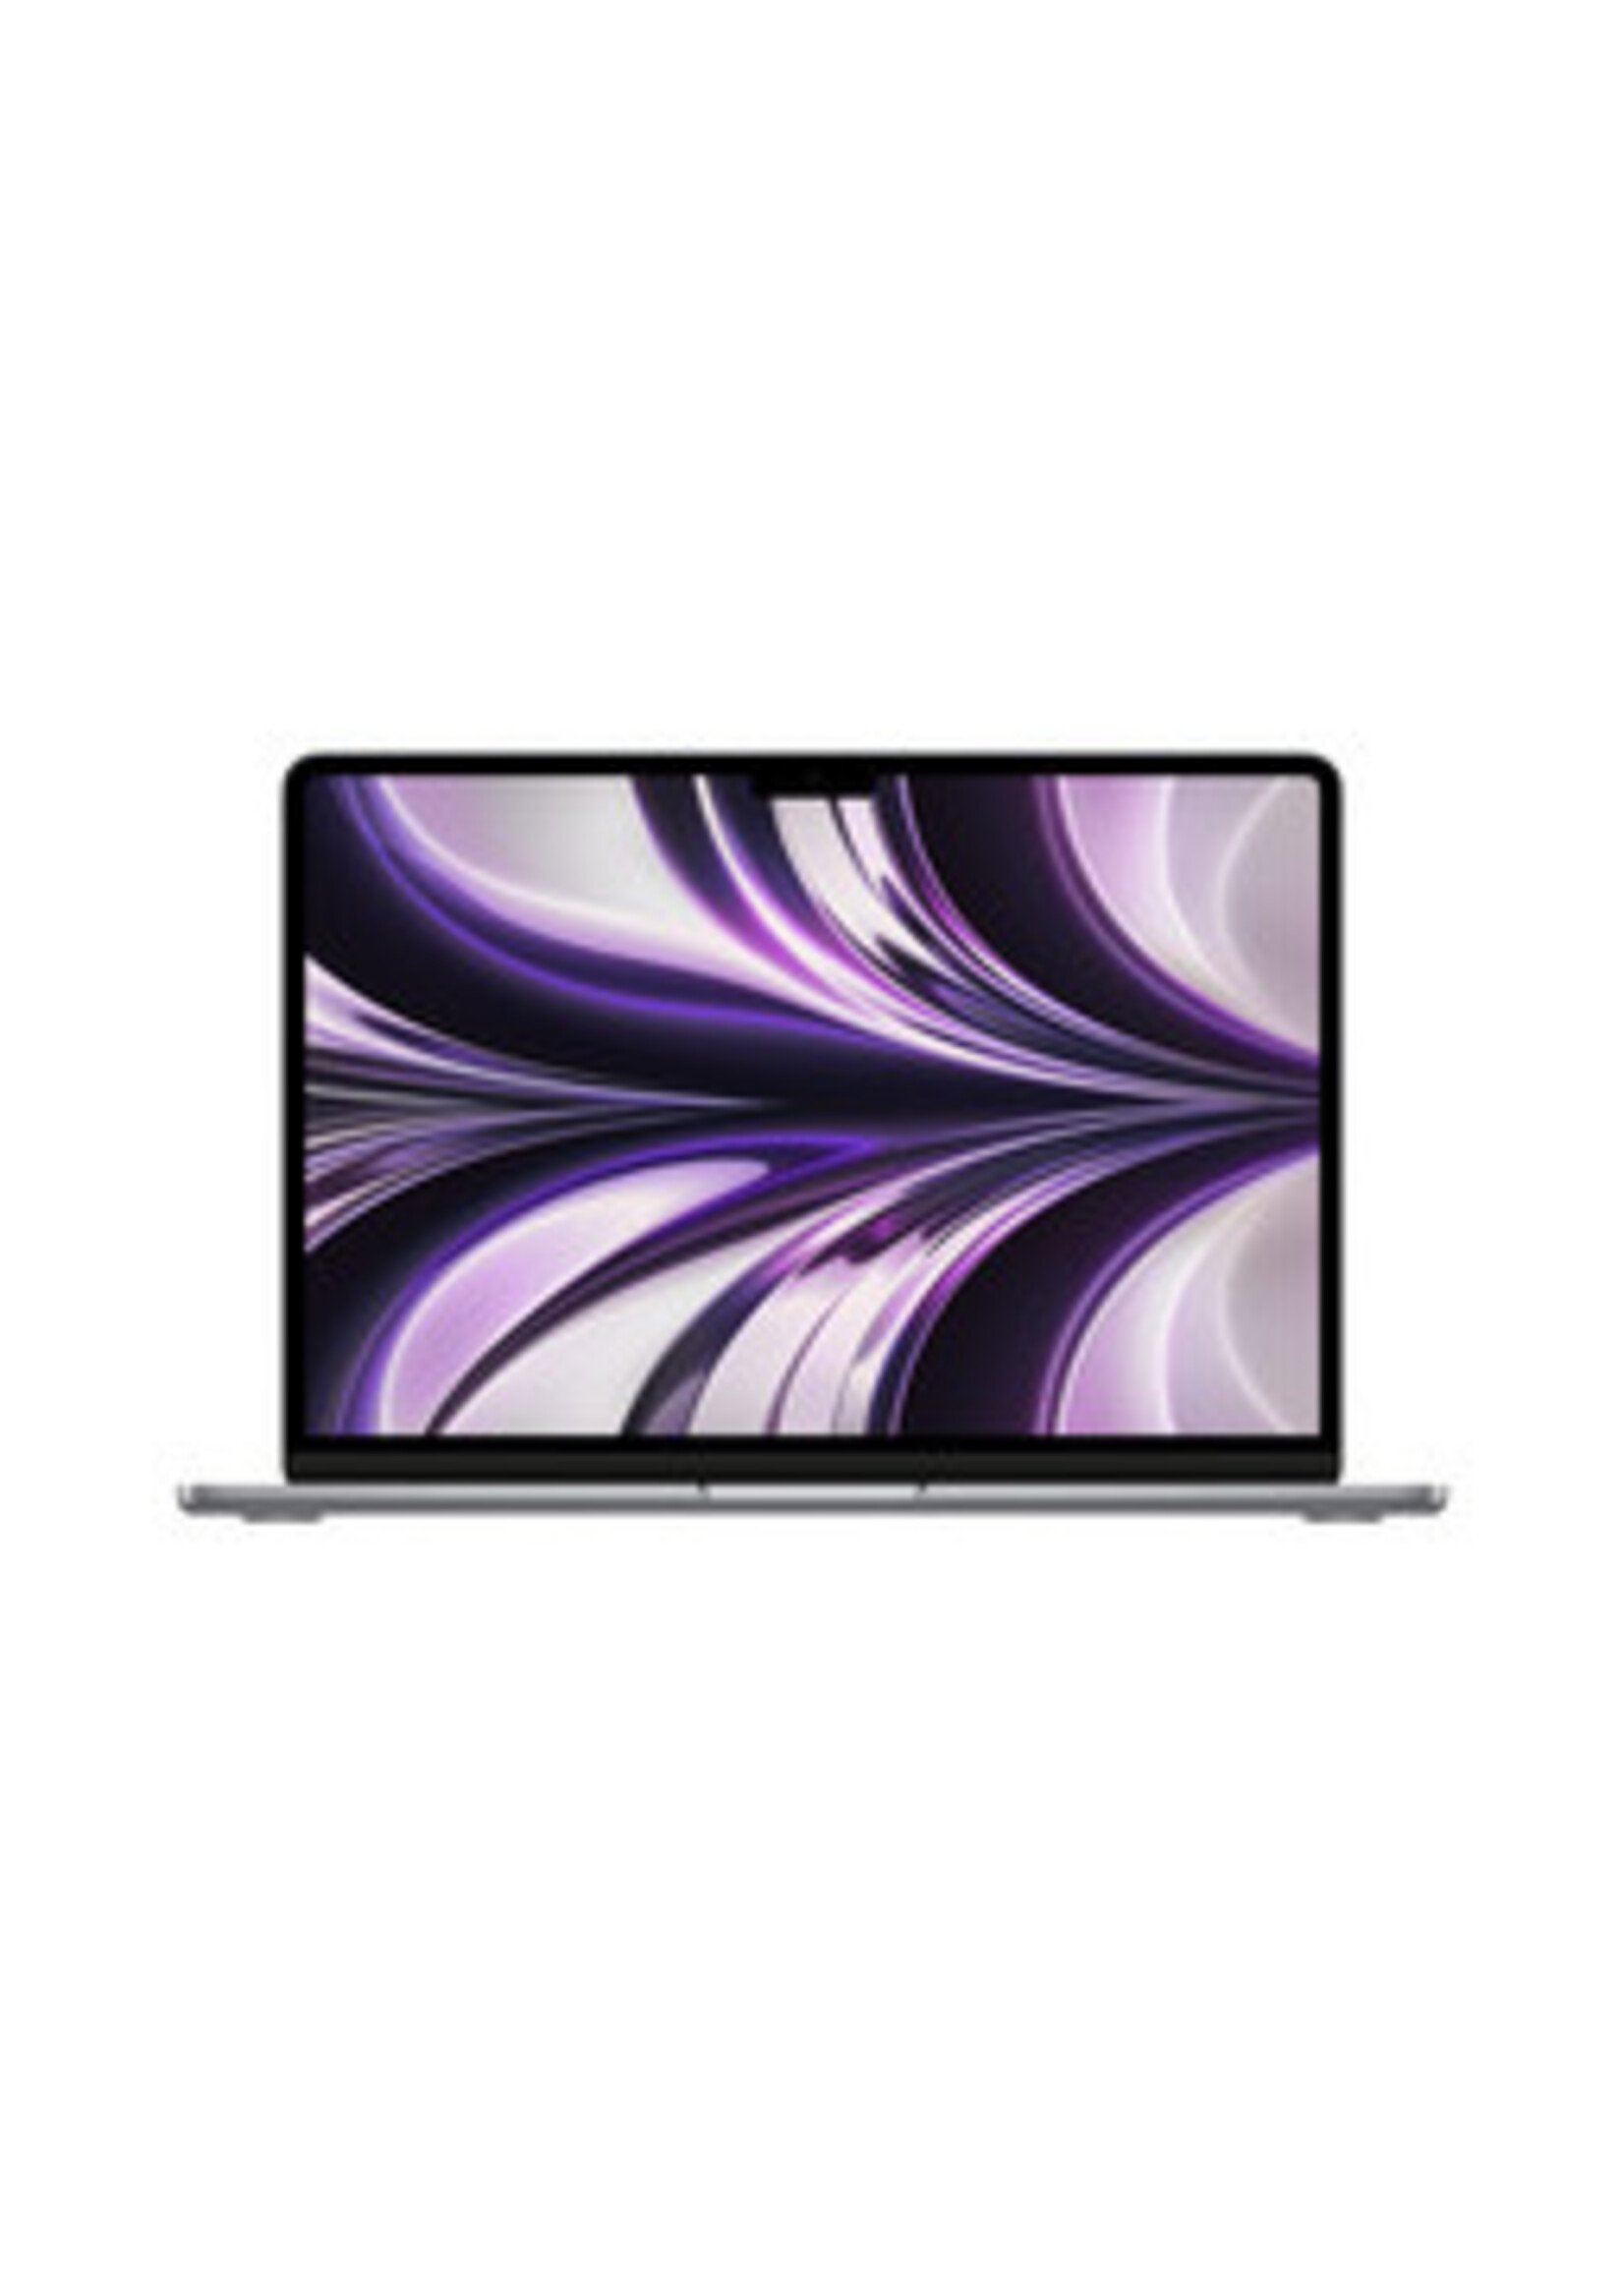 Apple 13-inch MacBook Air: Apple M2 chip with 8-core CPU and 10-core GPU, 512GB - Space Gray (June 2022) w/3-Year AppleCare+ and 16GB Memory